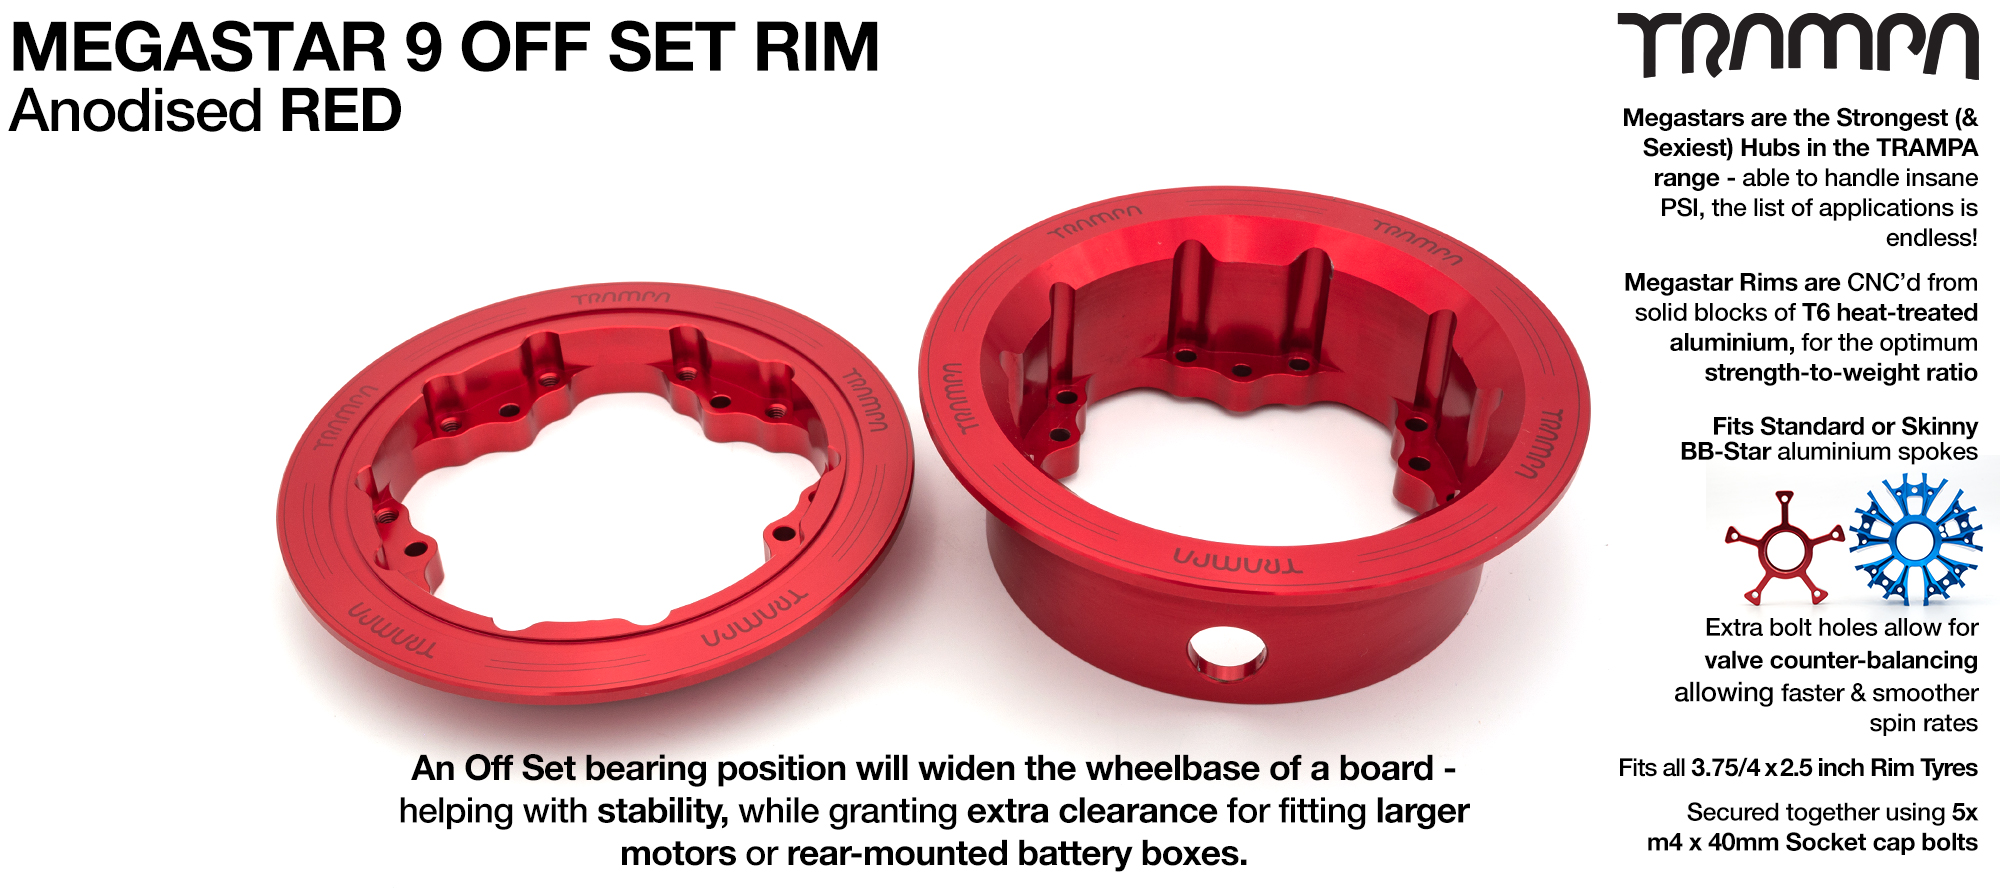 MEGASTAR 9 Rims Measure 3.75/4x 2.5 Inch & the bearings are positioned OFF-SET & accept 3.75 & 4 Inch Rim Tyres - RED